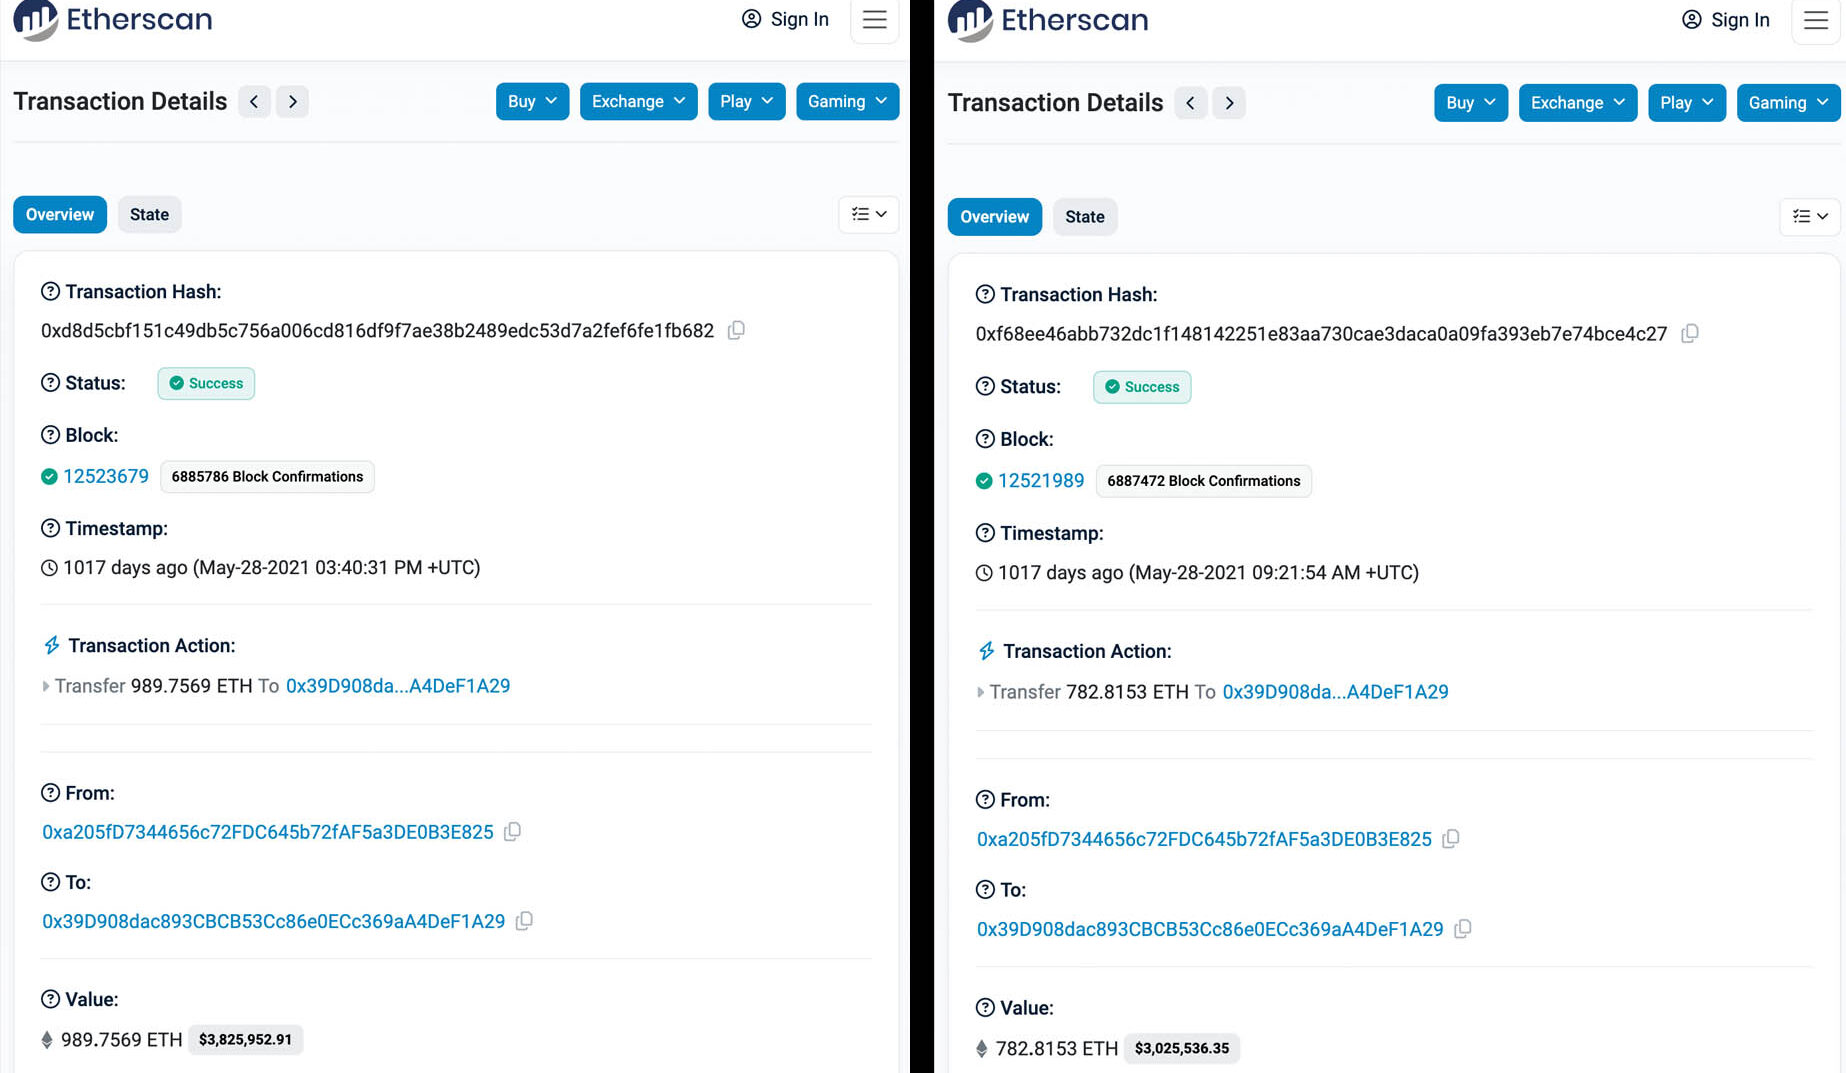 Screenshots from the Etherscan website showing details of the two transactions.